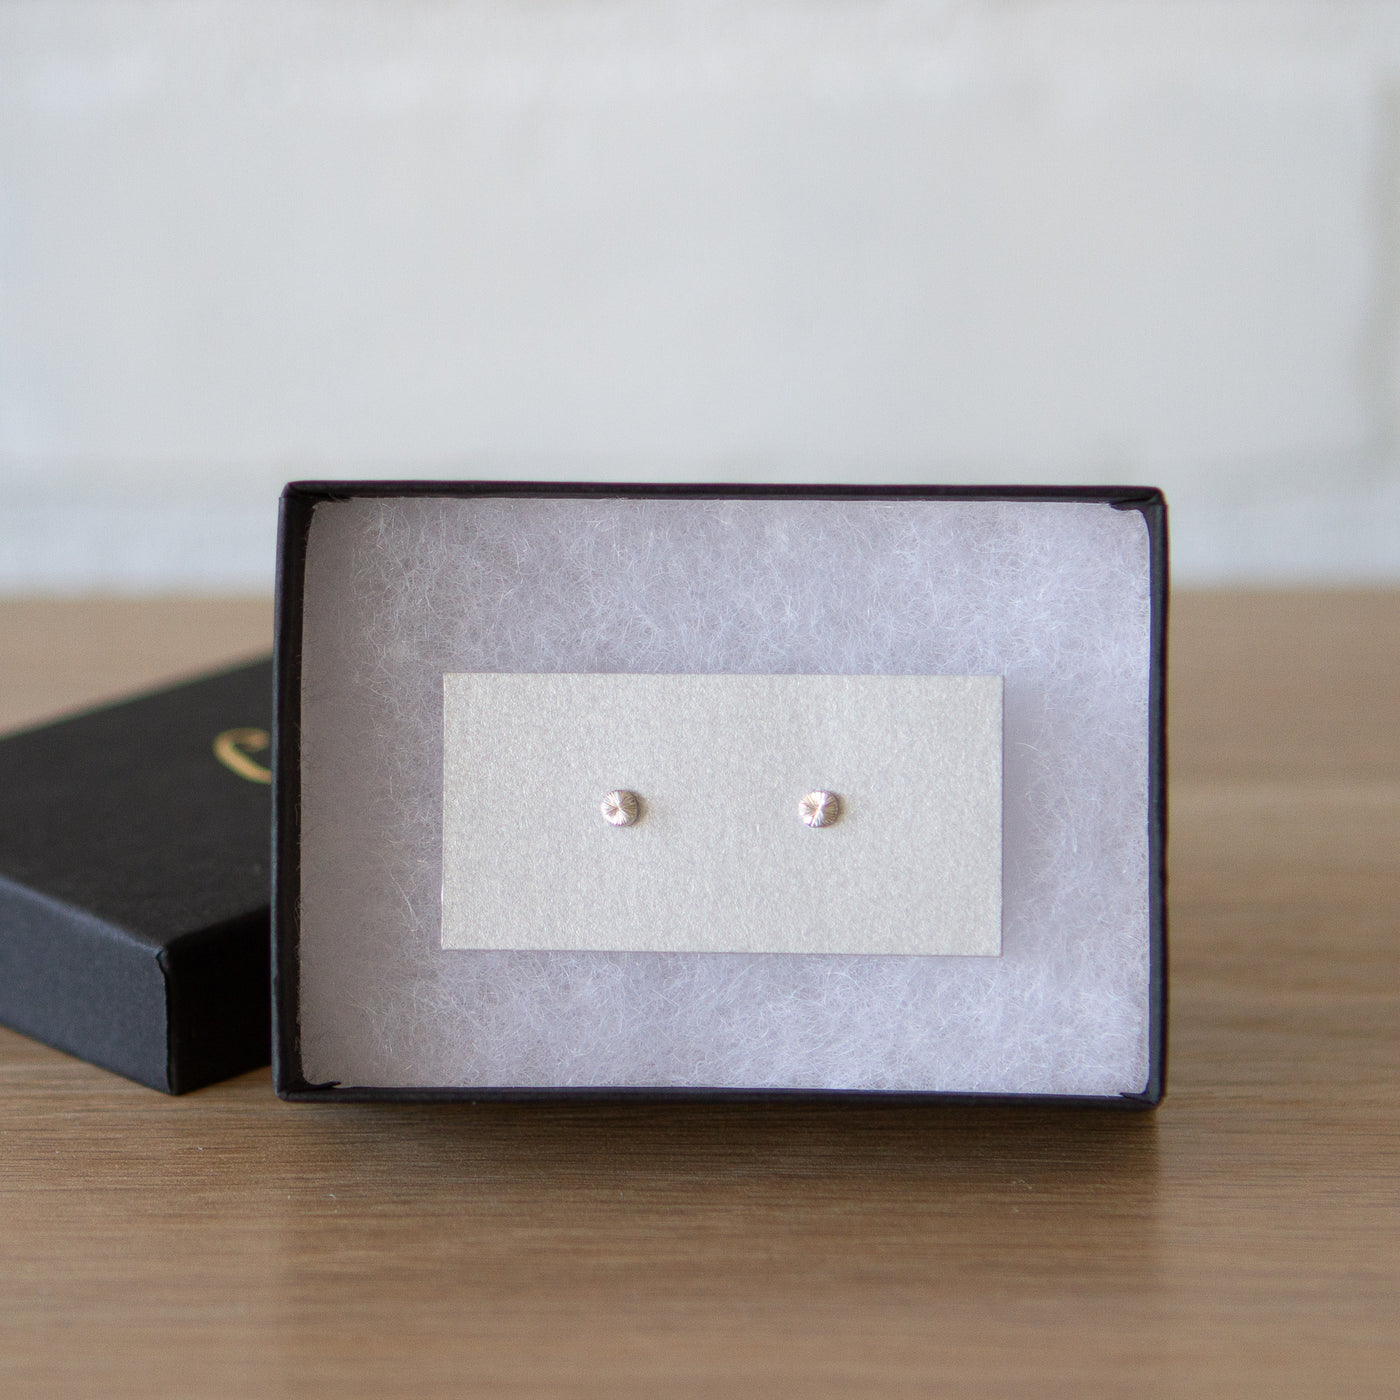 Tiny engraved silver stud earring by Corey Egan in a gift box